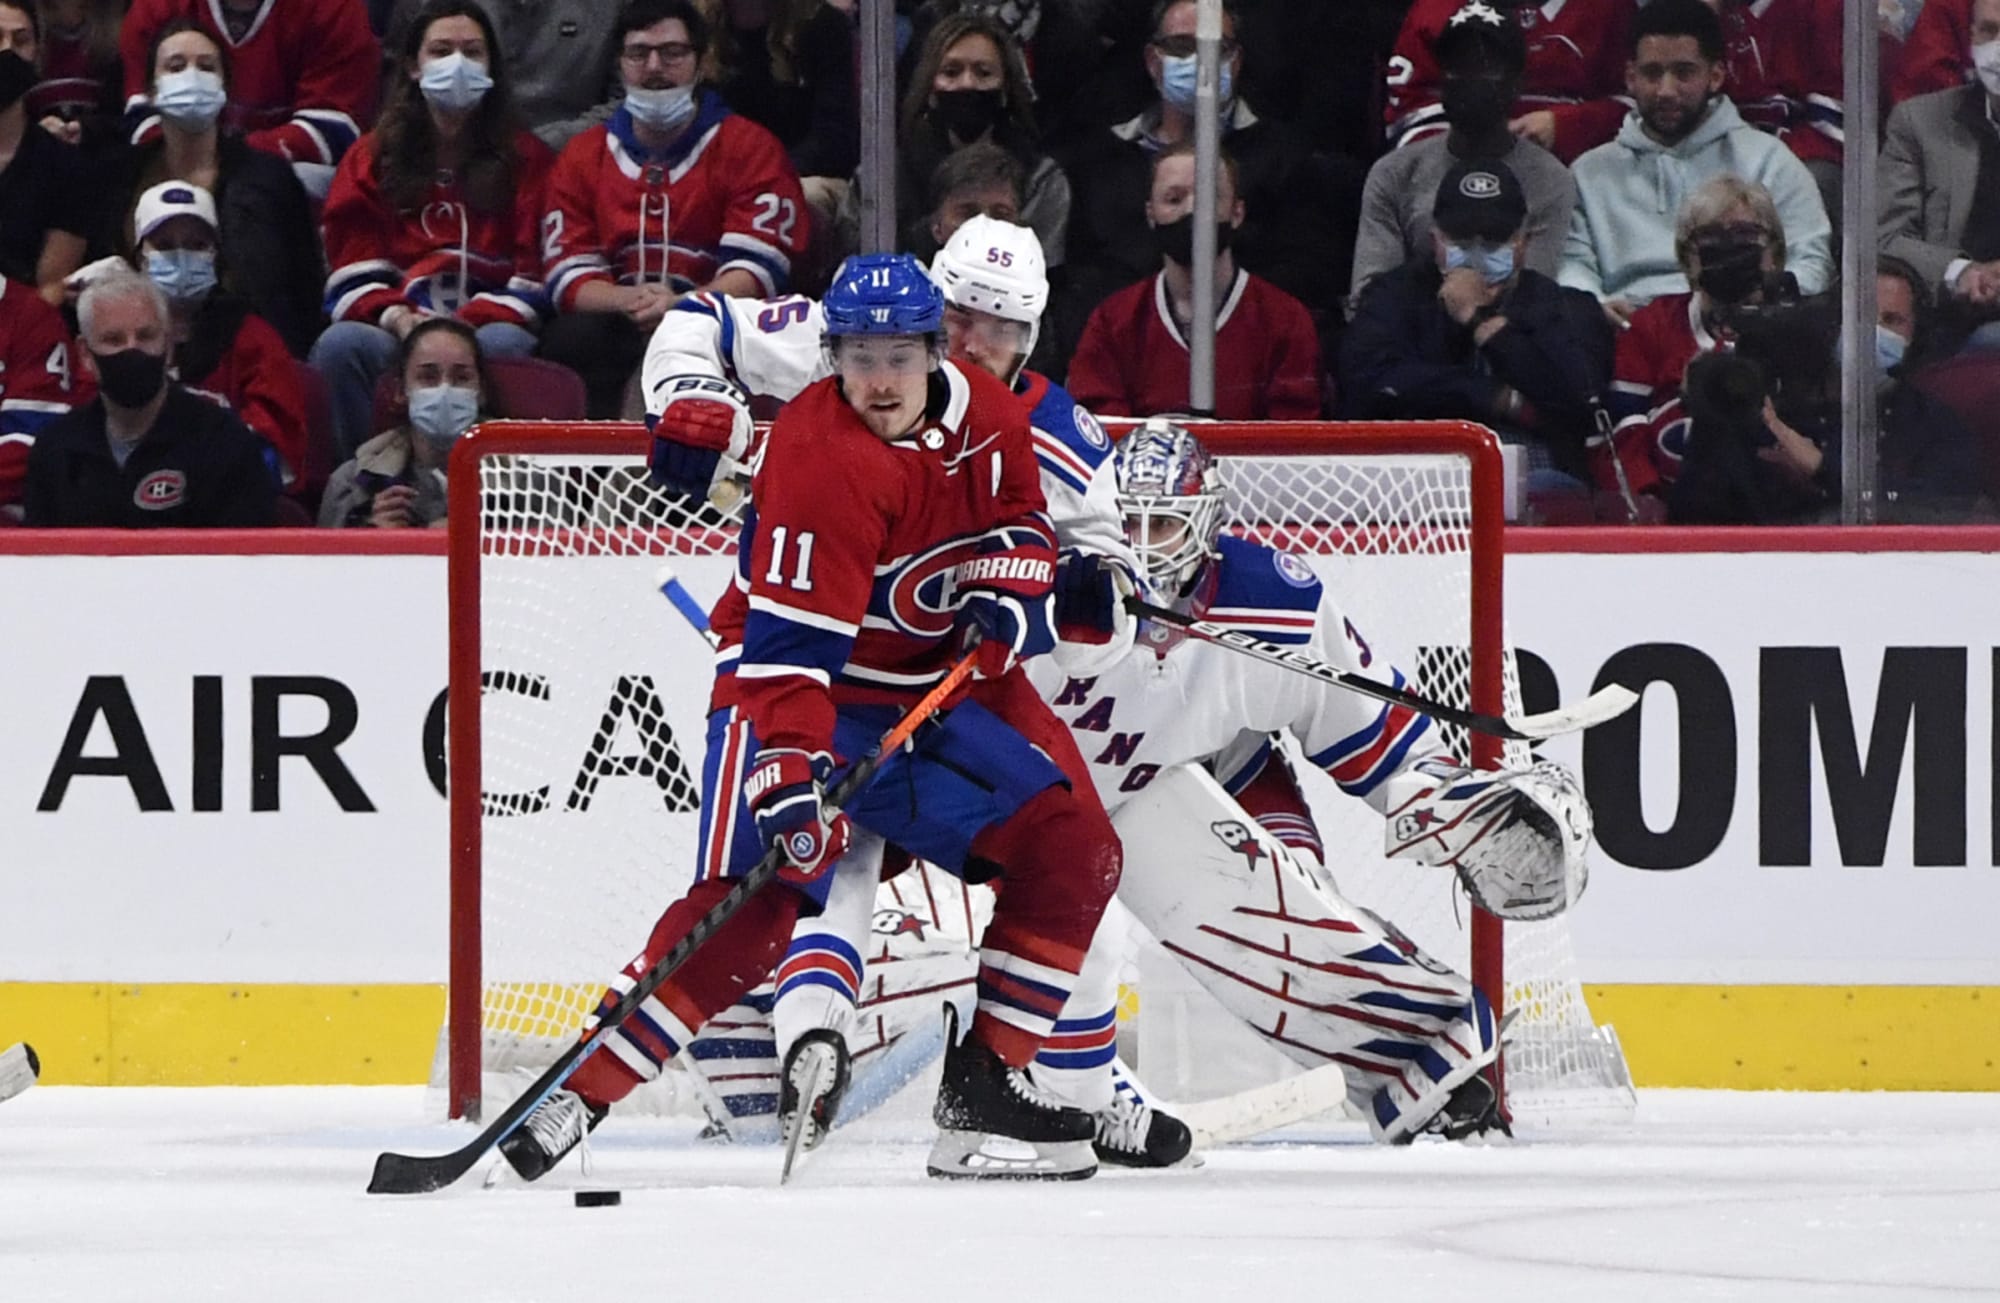 Canadiens Announce Several Roster Moves Ahead of Tonight's Game